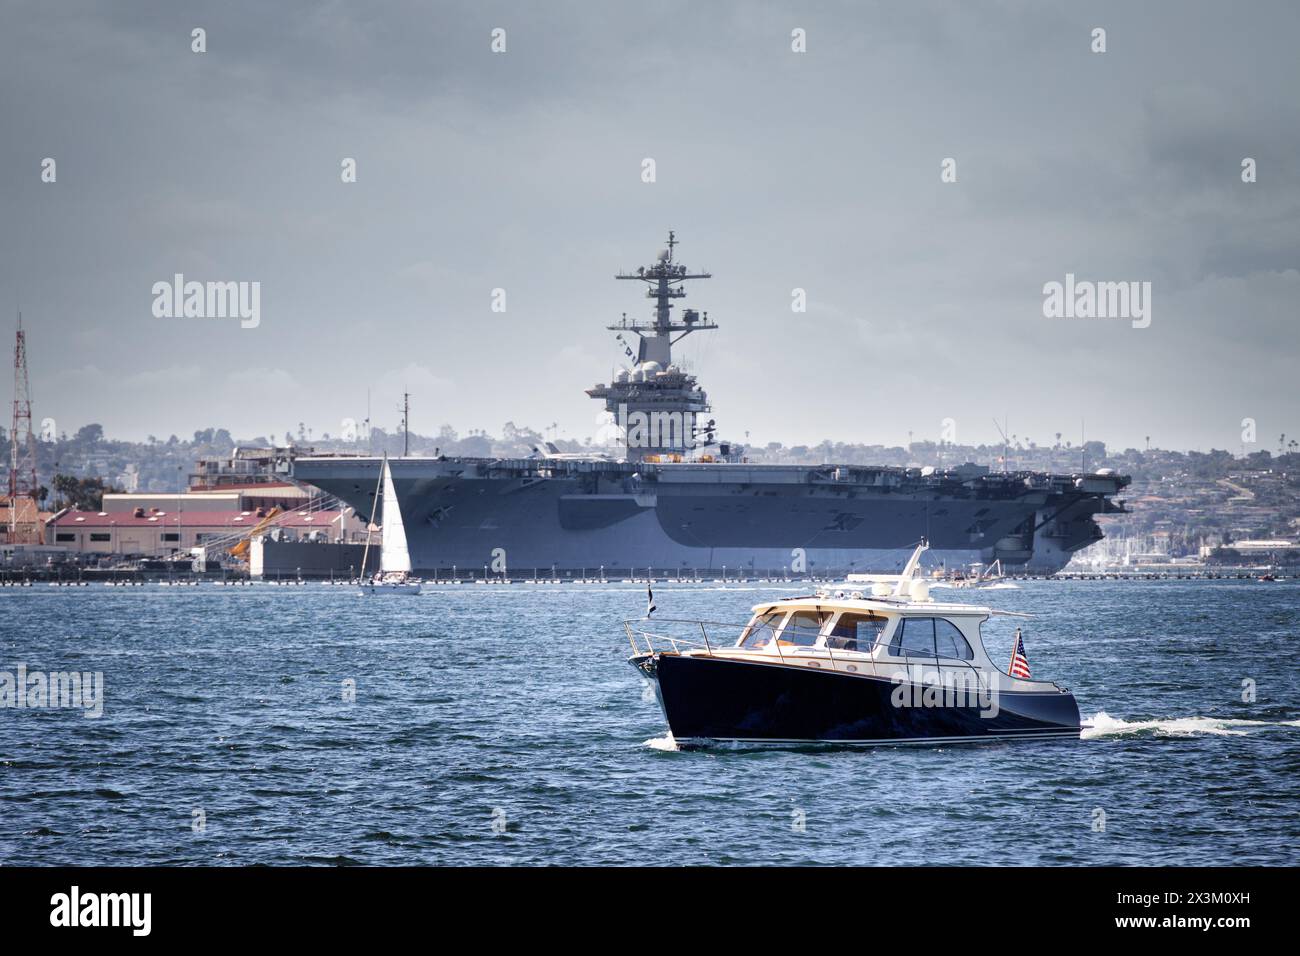 A boat on the water, with a US Navy aircraft carrier in background, at San Diego Bay off the coast of Coronado, California. Stock Photo